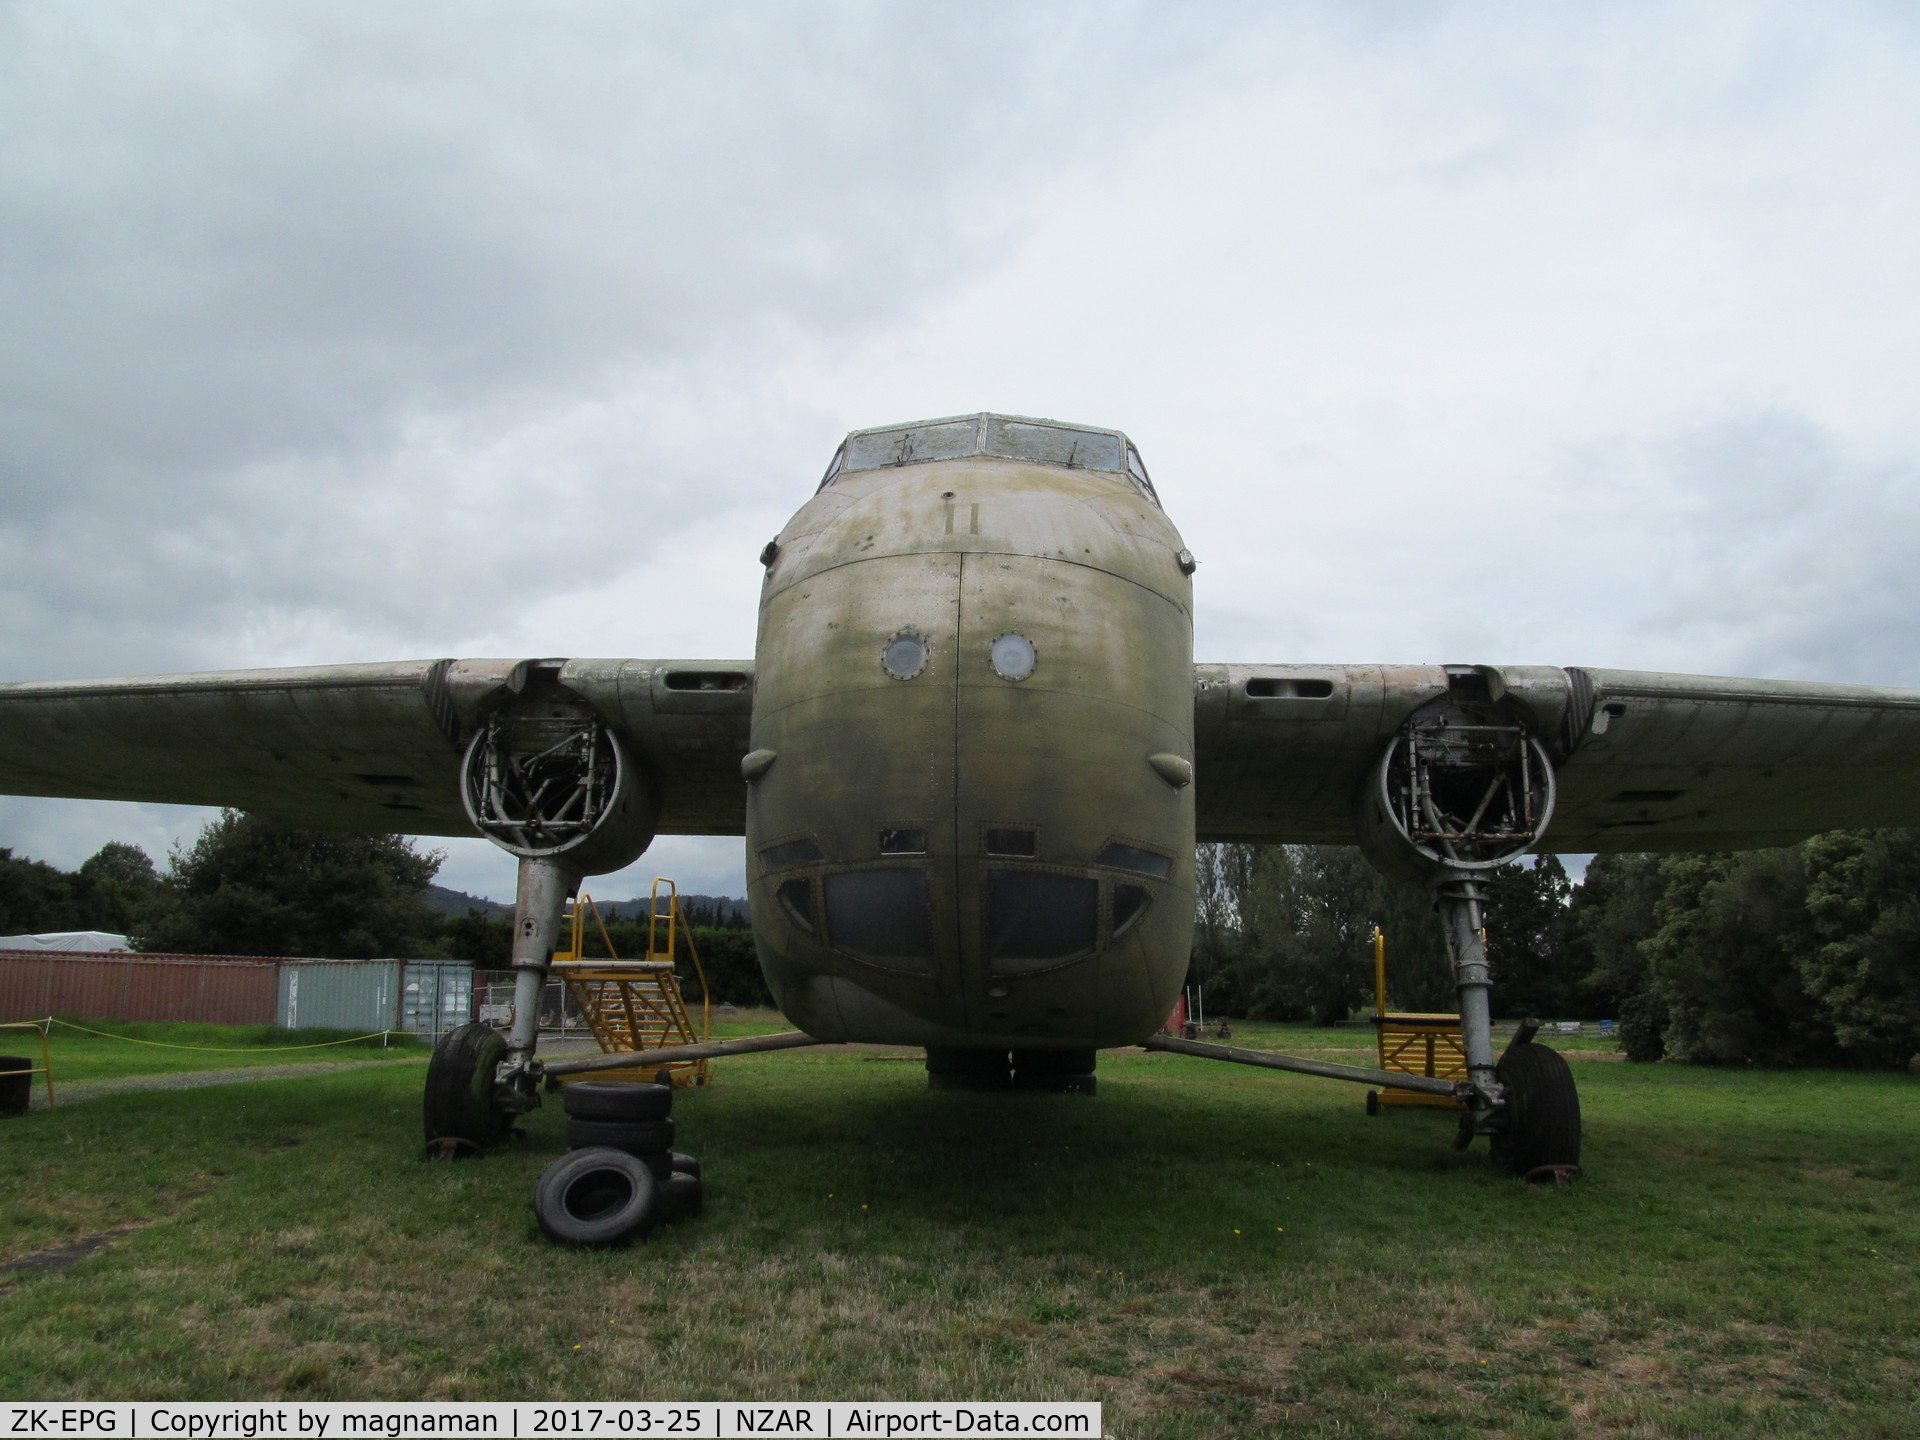 ZK-EPG, Bristol 170 Freighter Mk.31M C/N 13135, in process of dismantling for export to UK